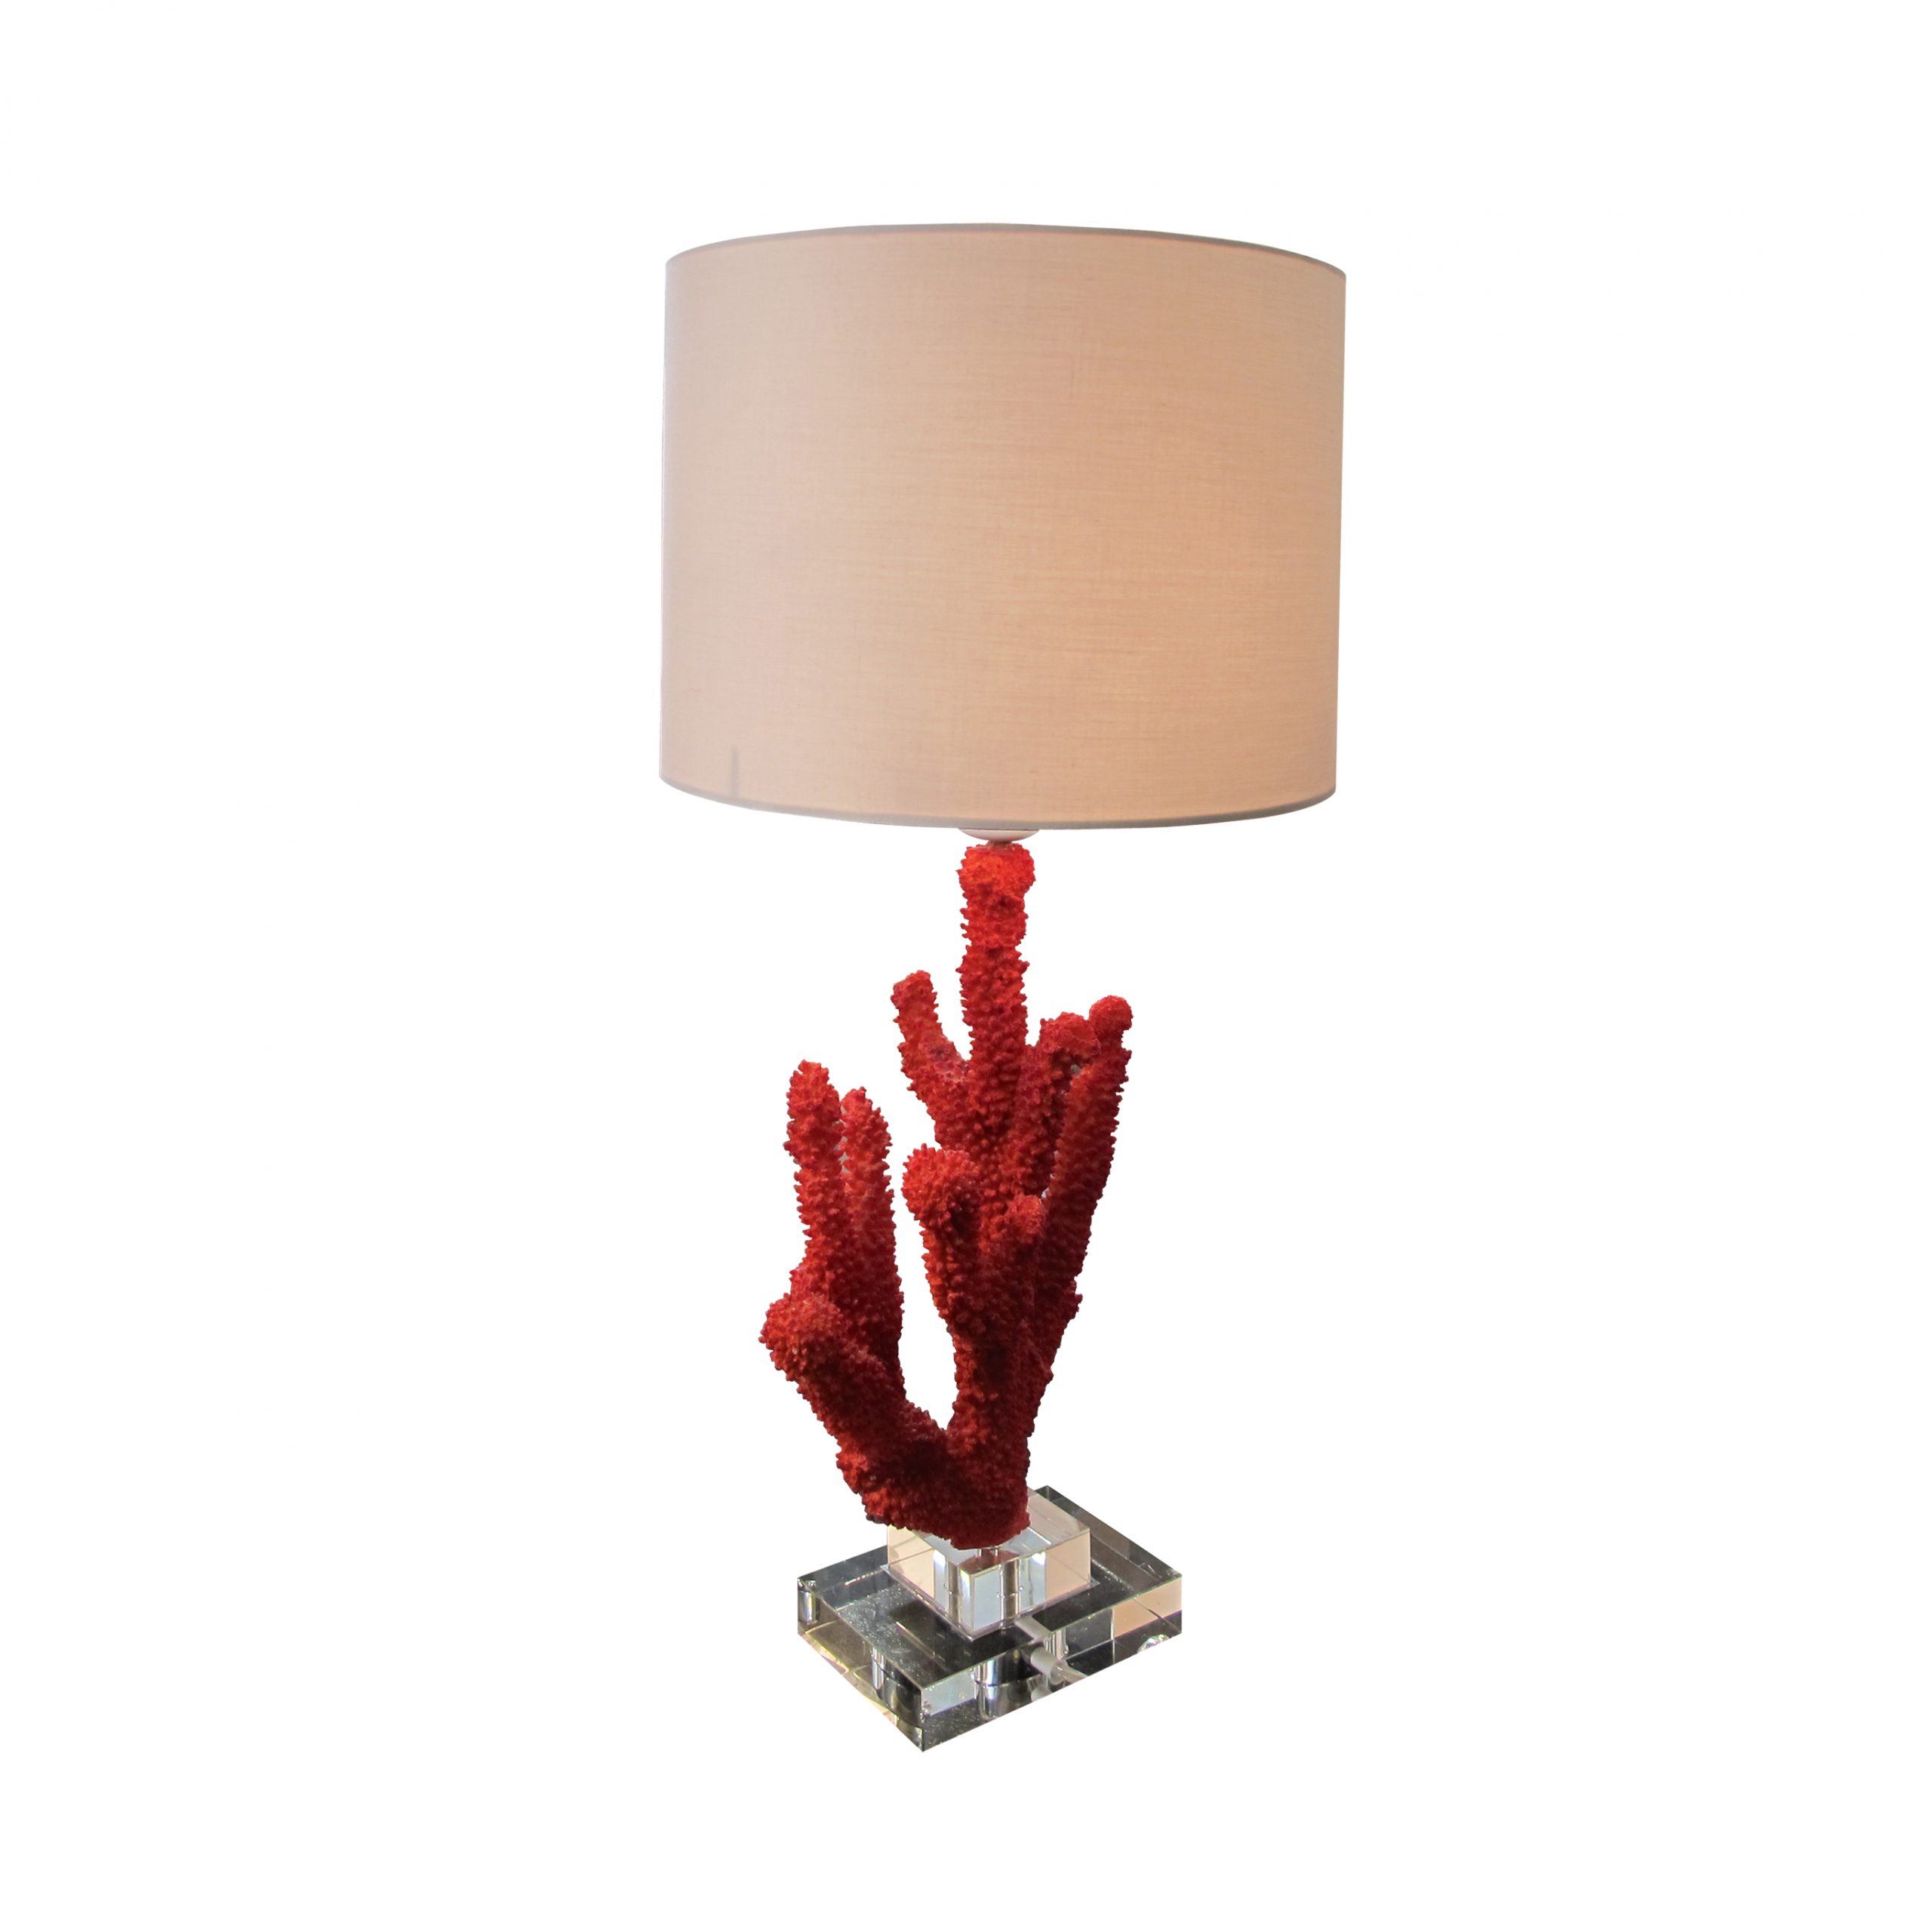 A Pair Of Resin Red C Table Lamps, Red Glass Base Table Lamp